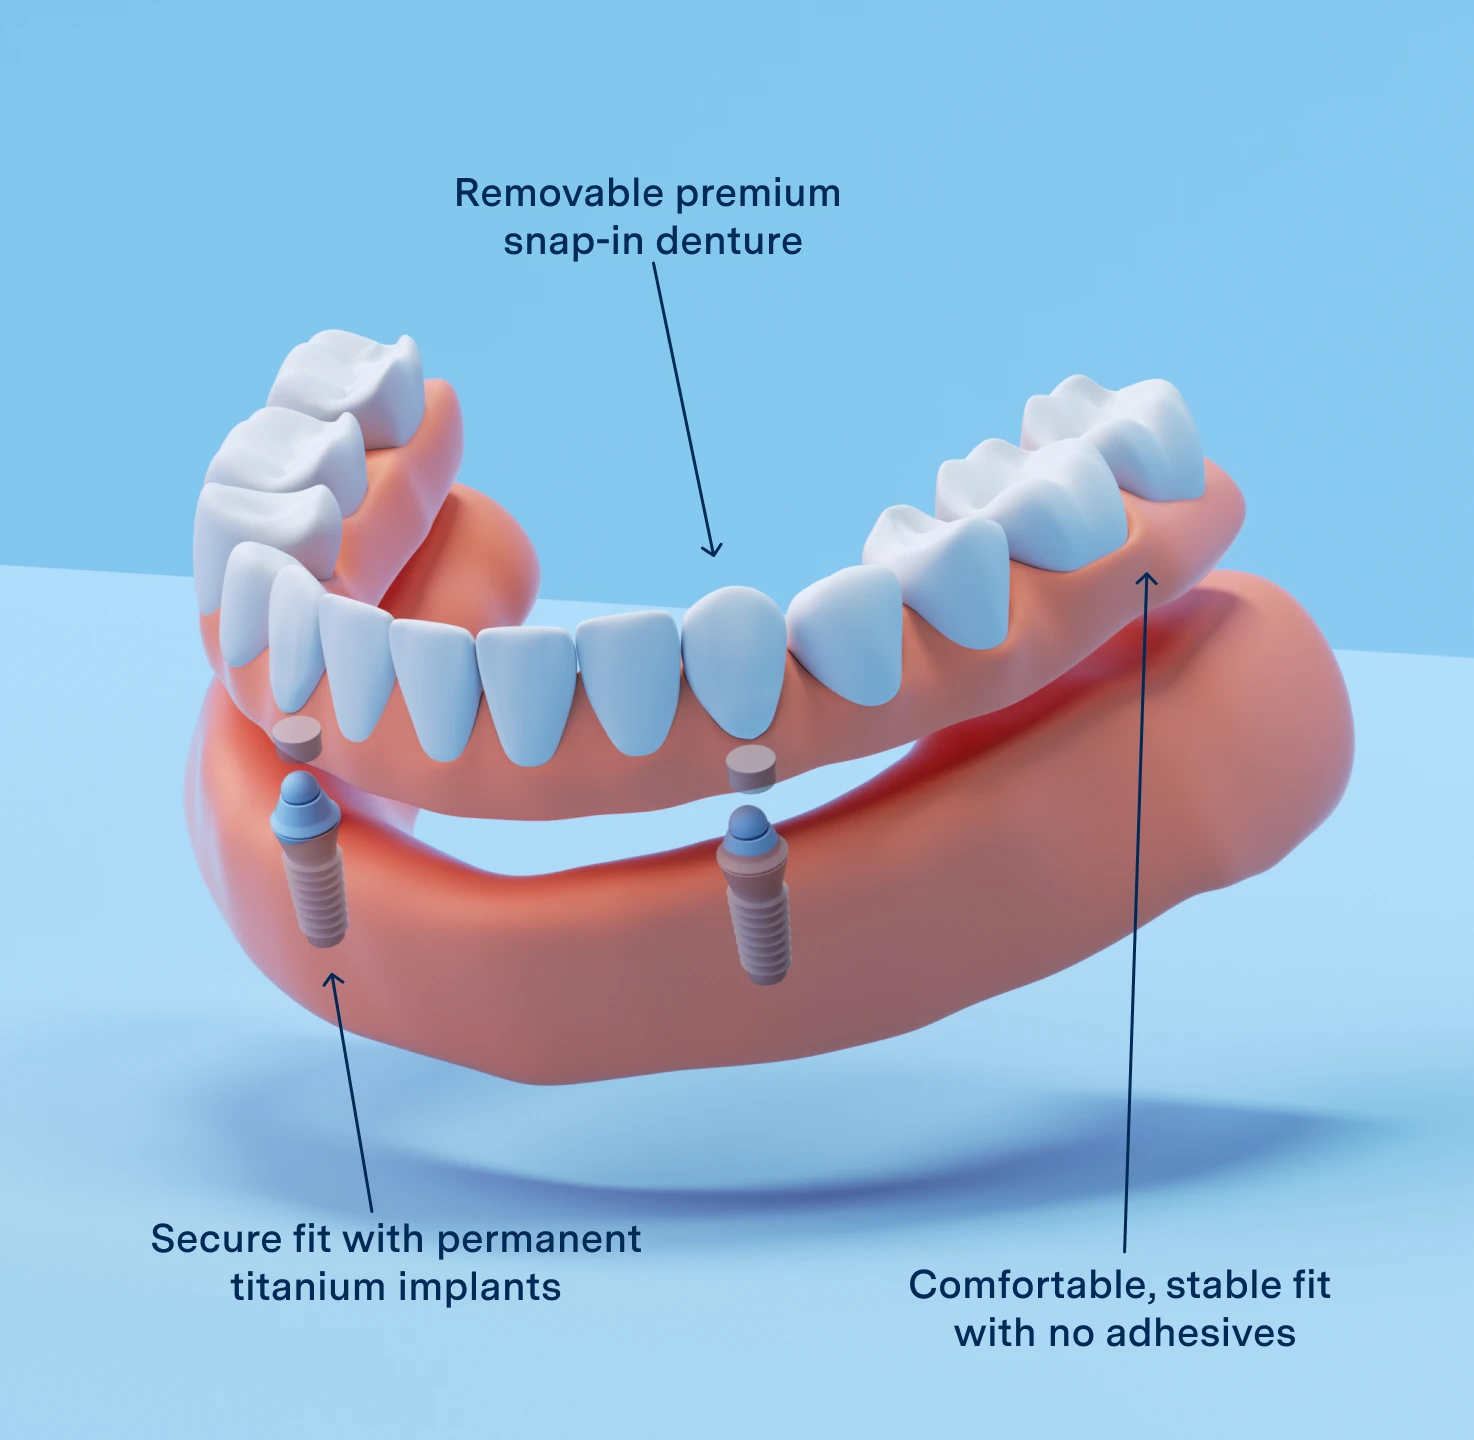 Graphic of Implant dentures, showing the features which include removeable premium snap-in denture, with the secure fit of permanent titanium implants, designed for a comfortable, stable fit with no adhesives.